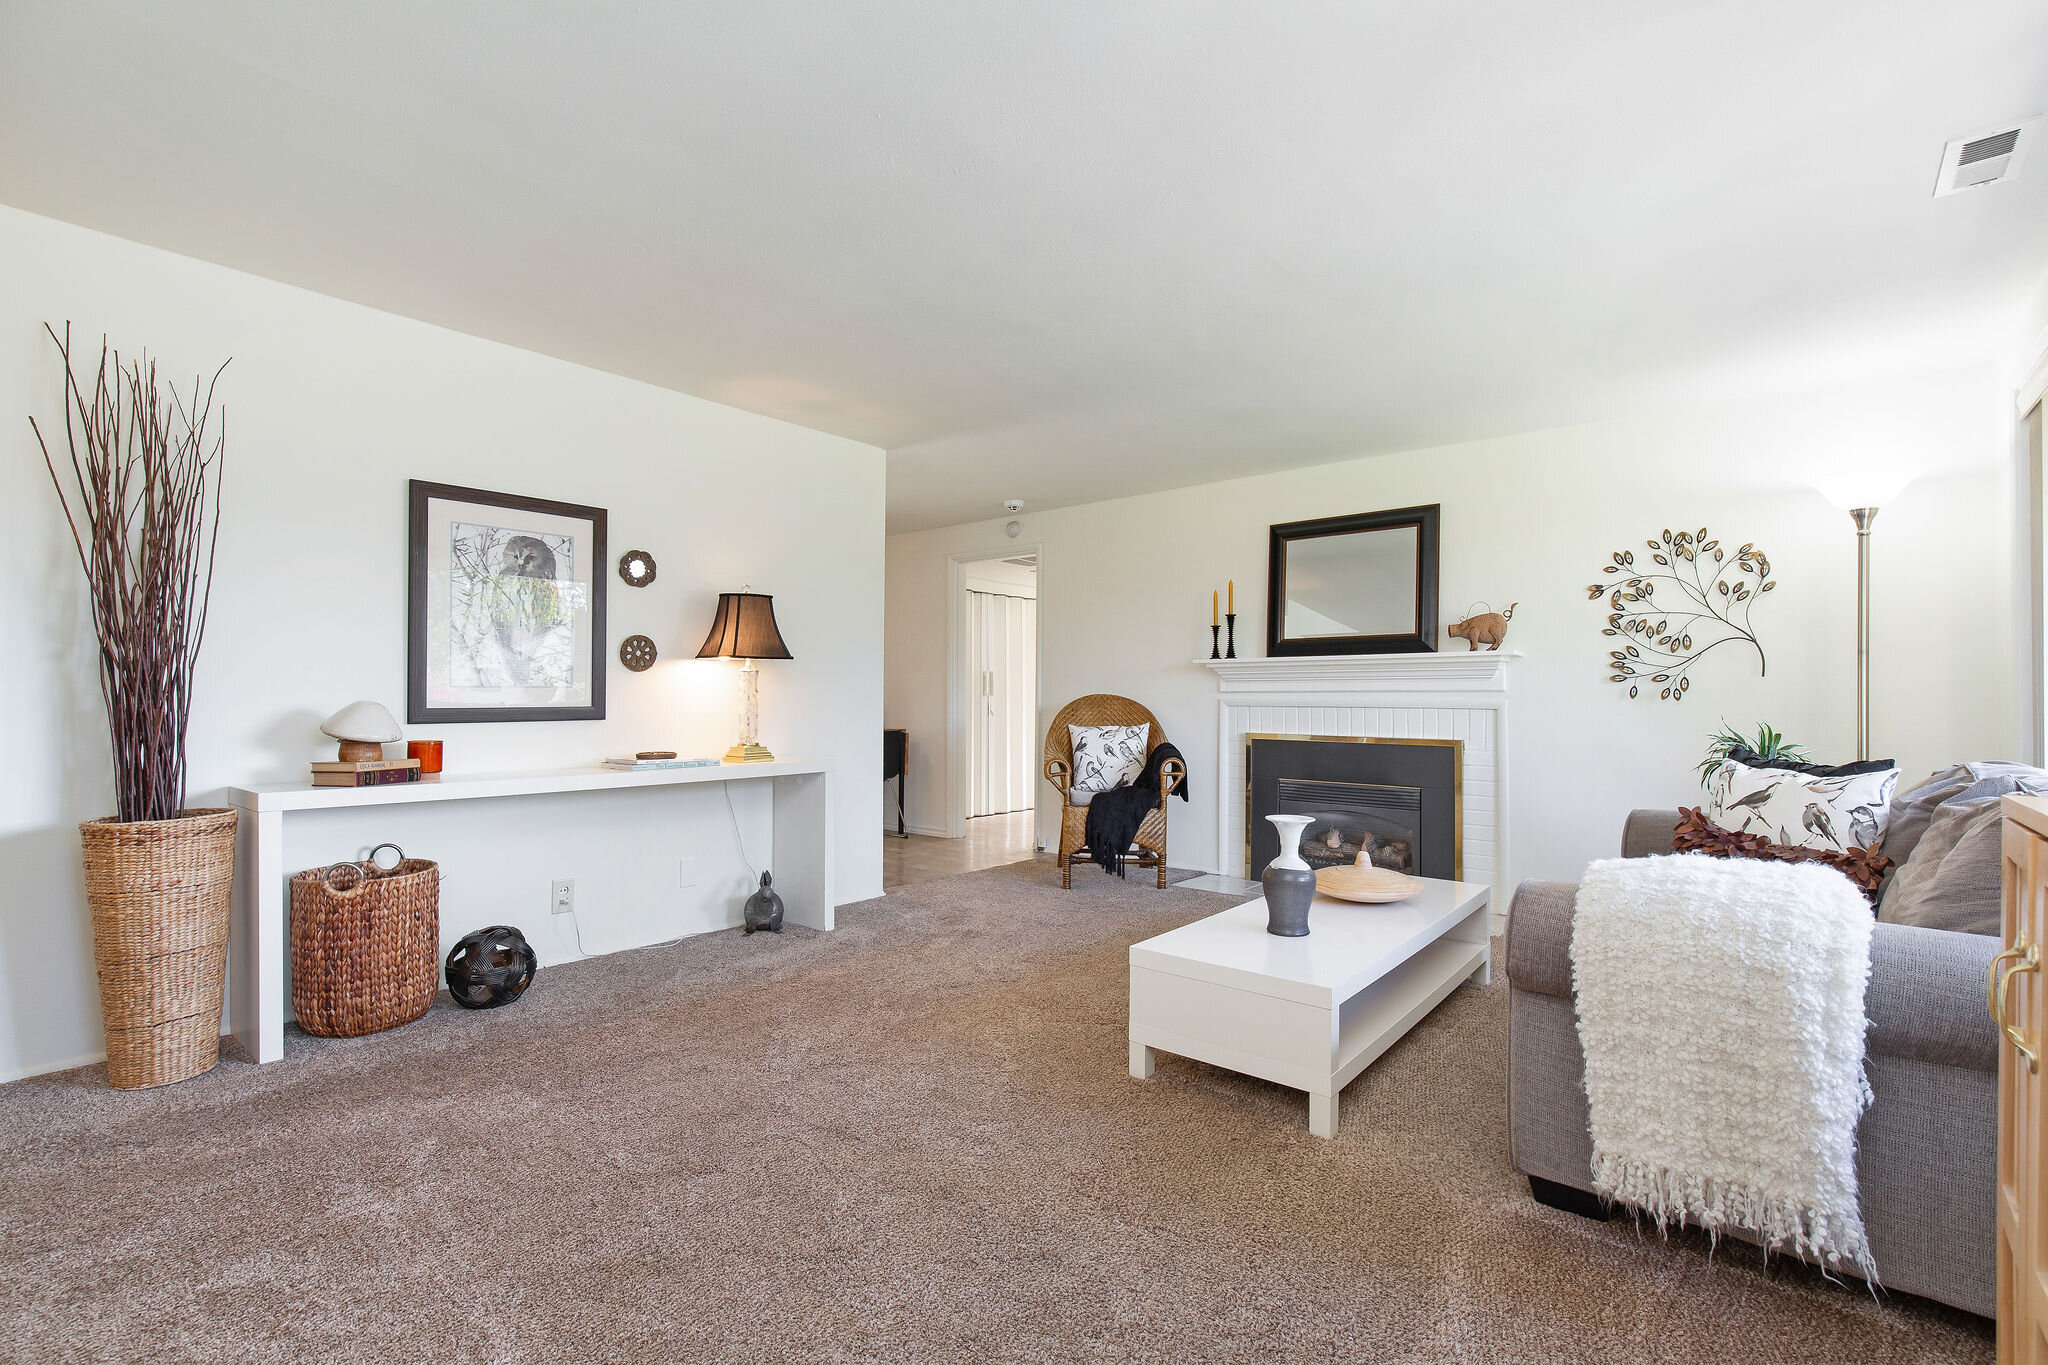  Spacious living room with new carpets in 2016 and a gas fireplace to keep the place toasty in the winter. 